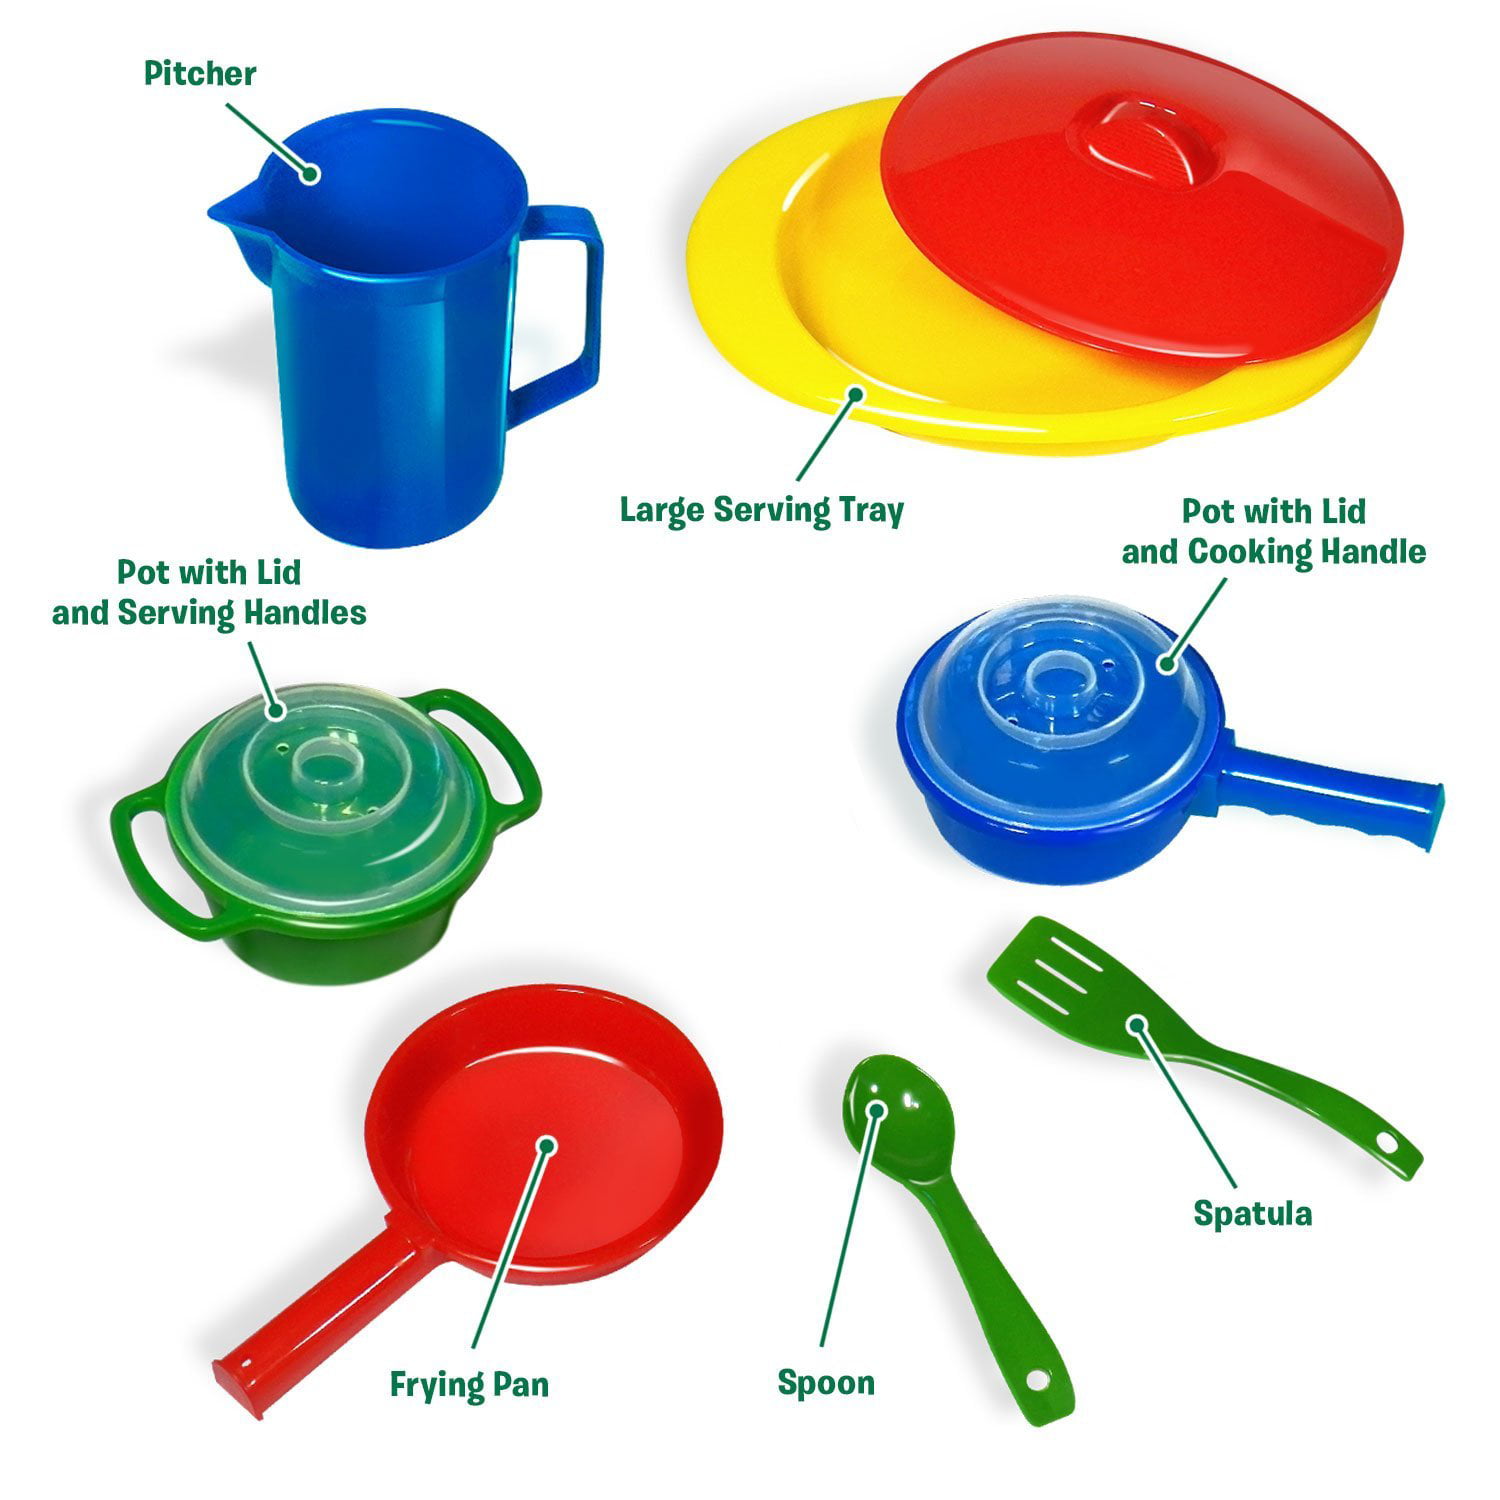 toy pots and pans for toddlers